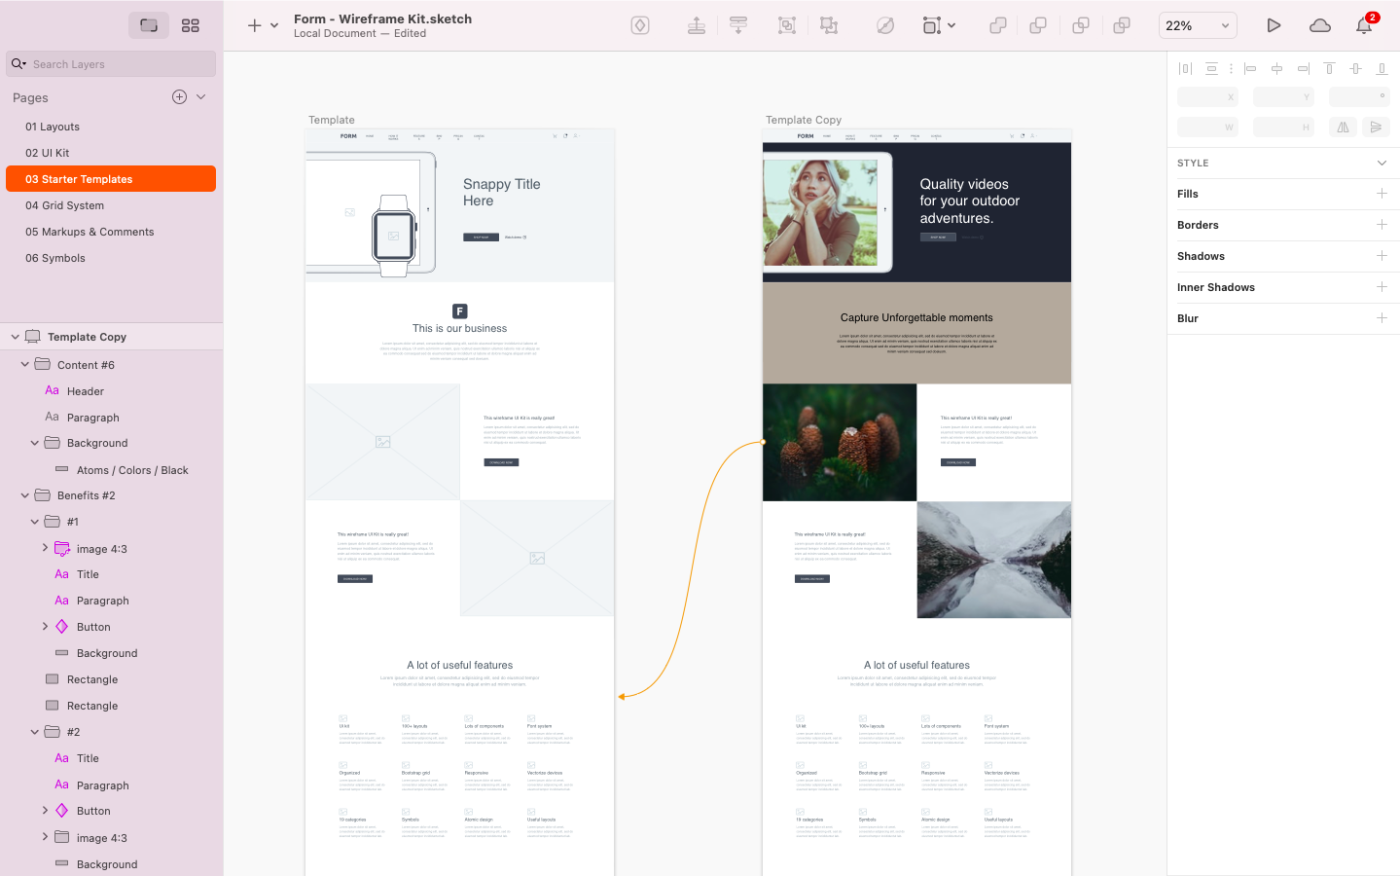 Sketch, our pick for the best wireframe tool for detailed, vector-based designs